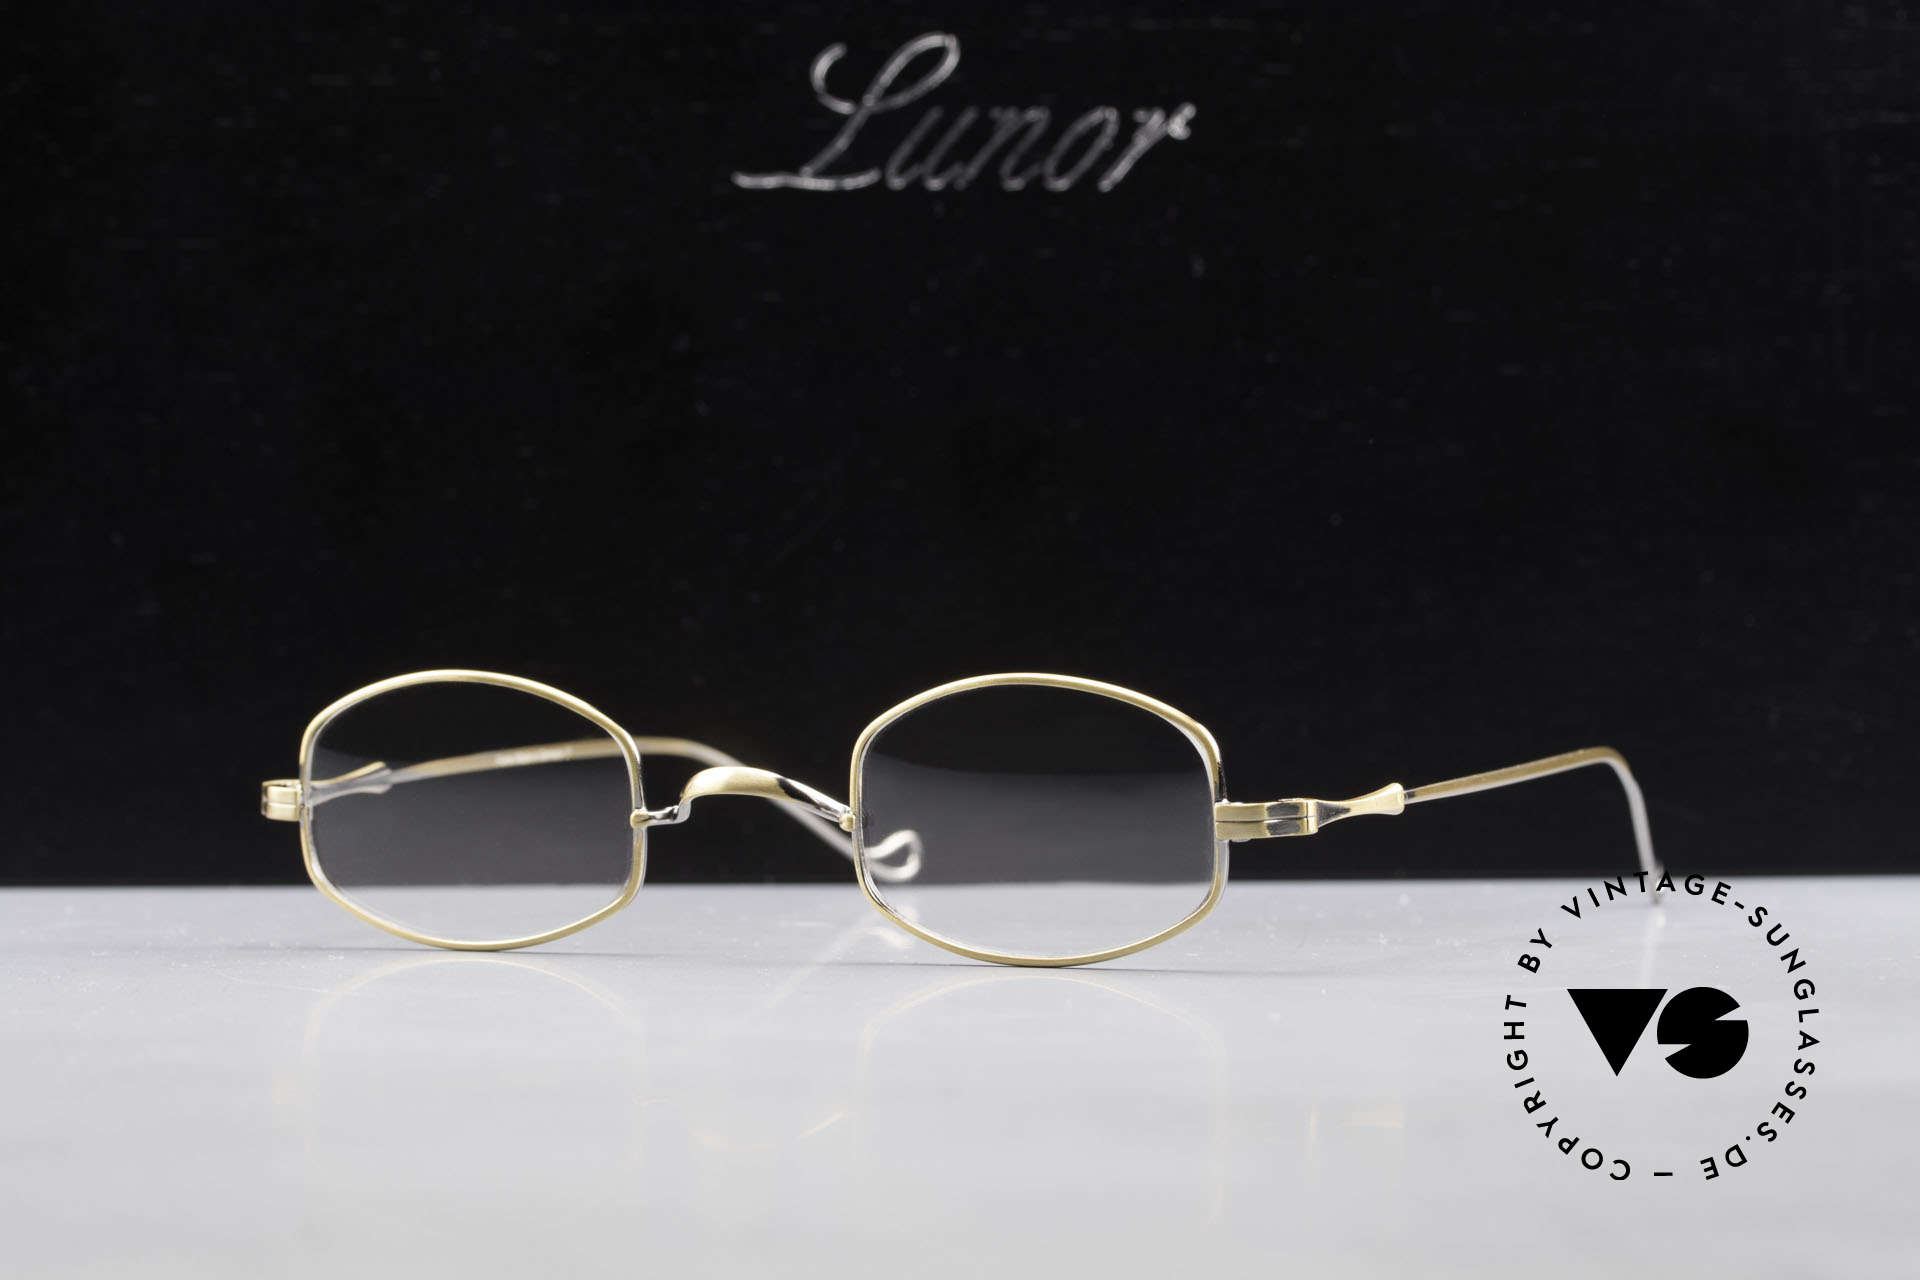 Lunor II 16 Lunor Eyeglasses Old Classic, Size: small, Made for Men and Women